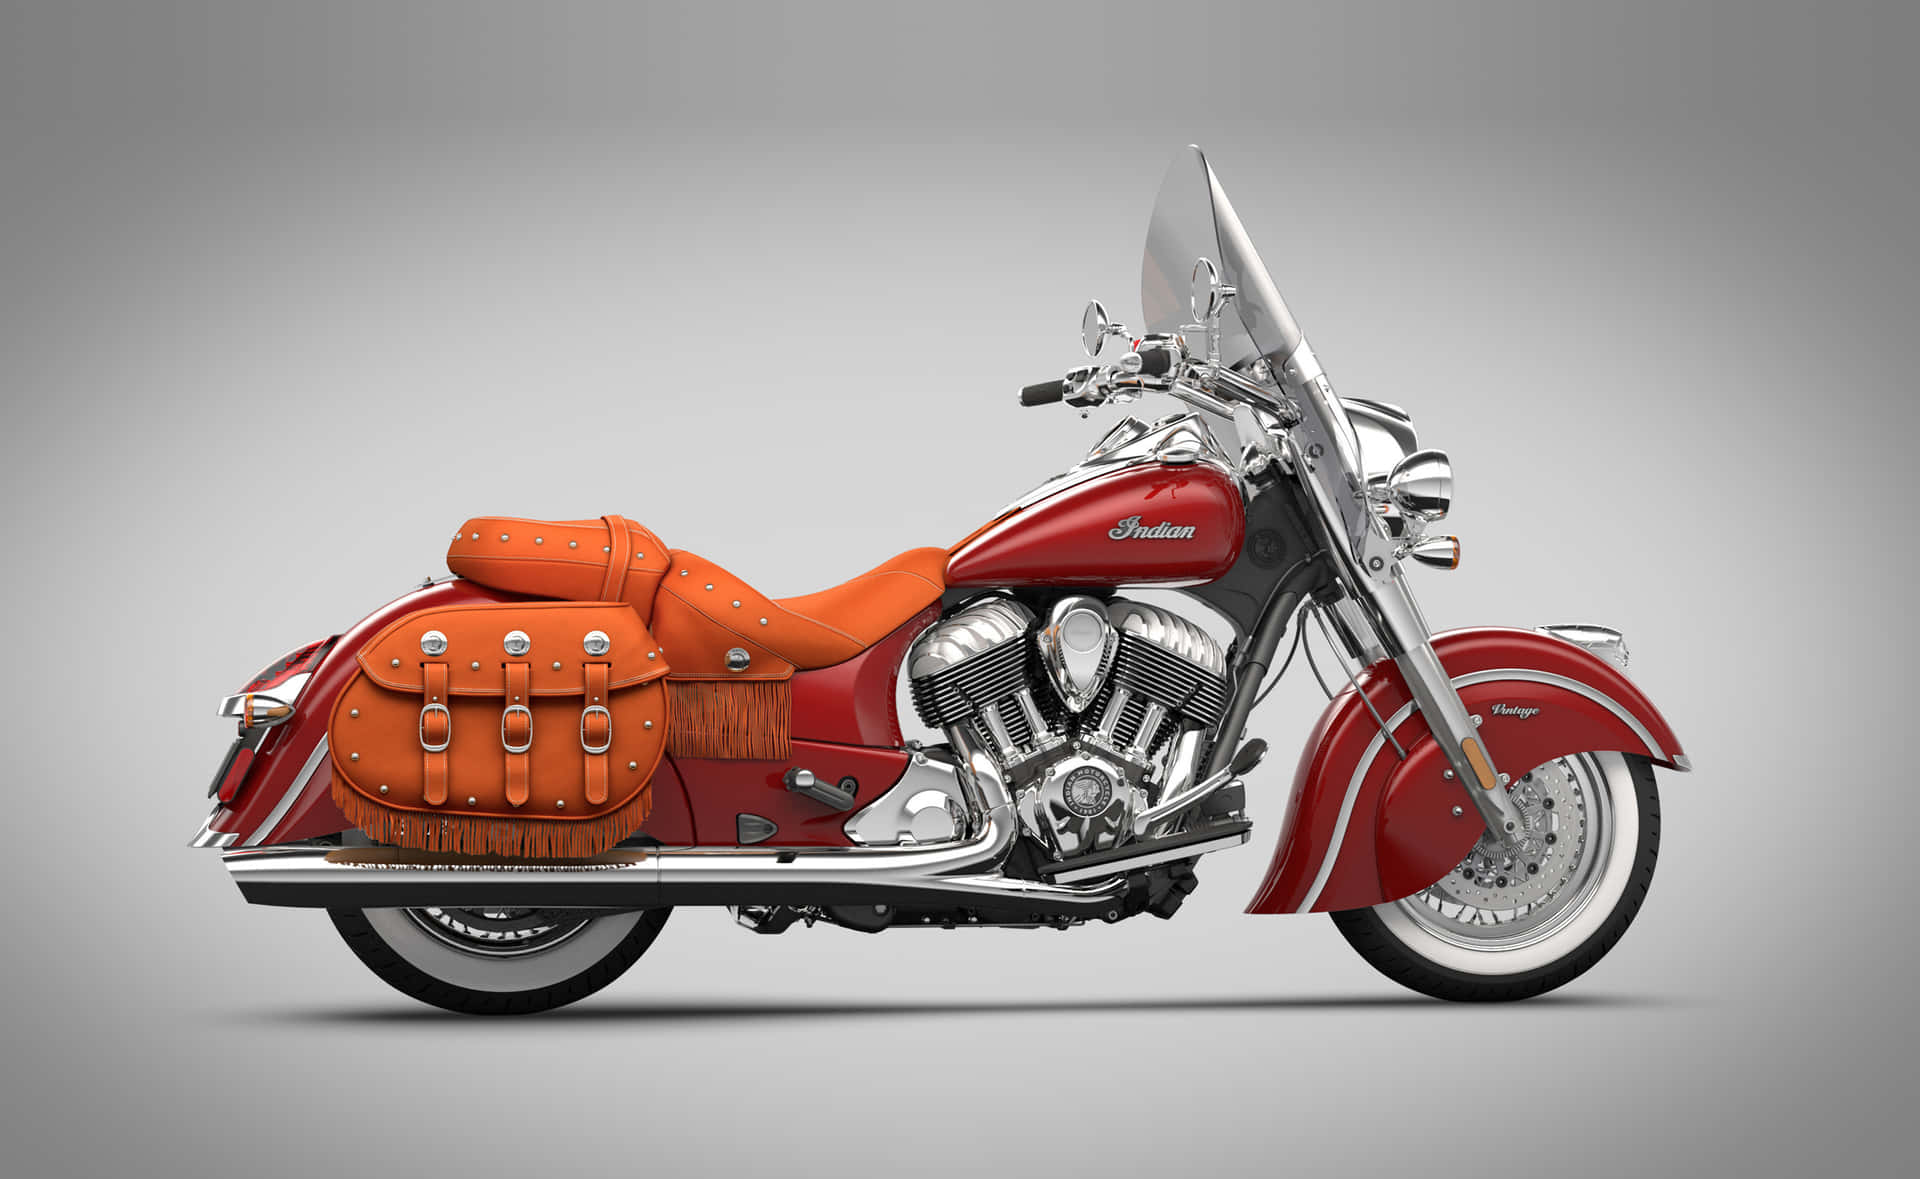 Classic Indian Motorcycle Dominating The Sunset Road Wallpaper